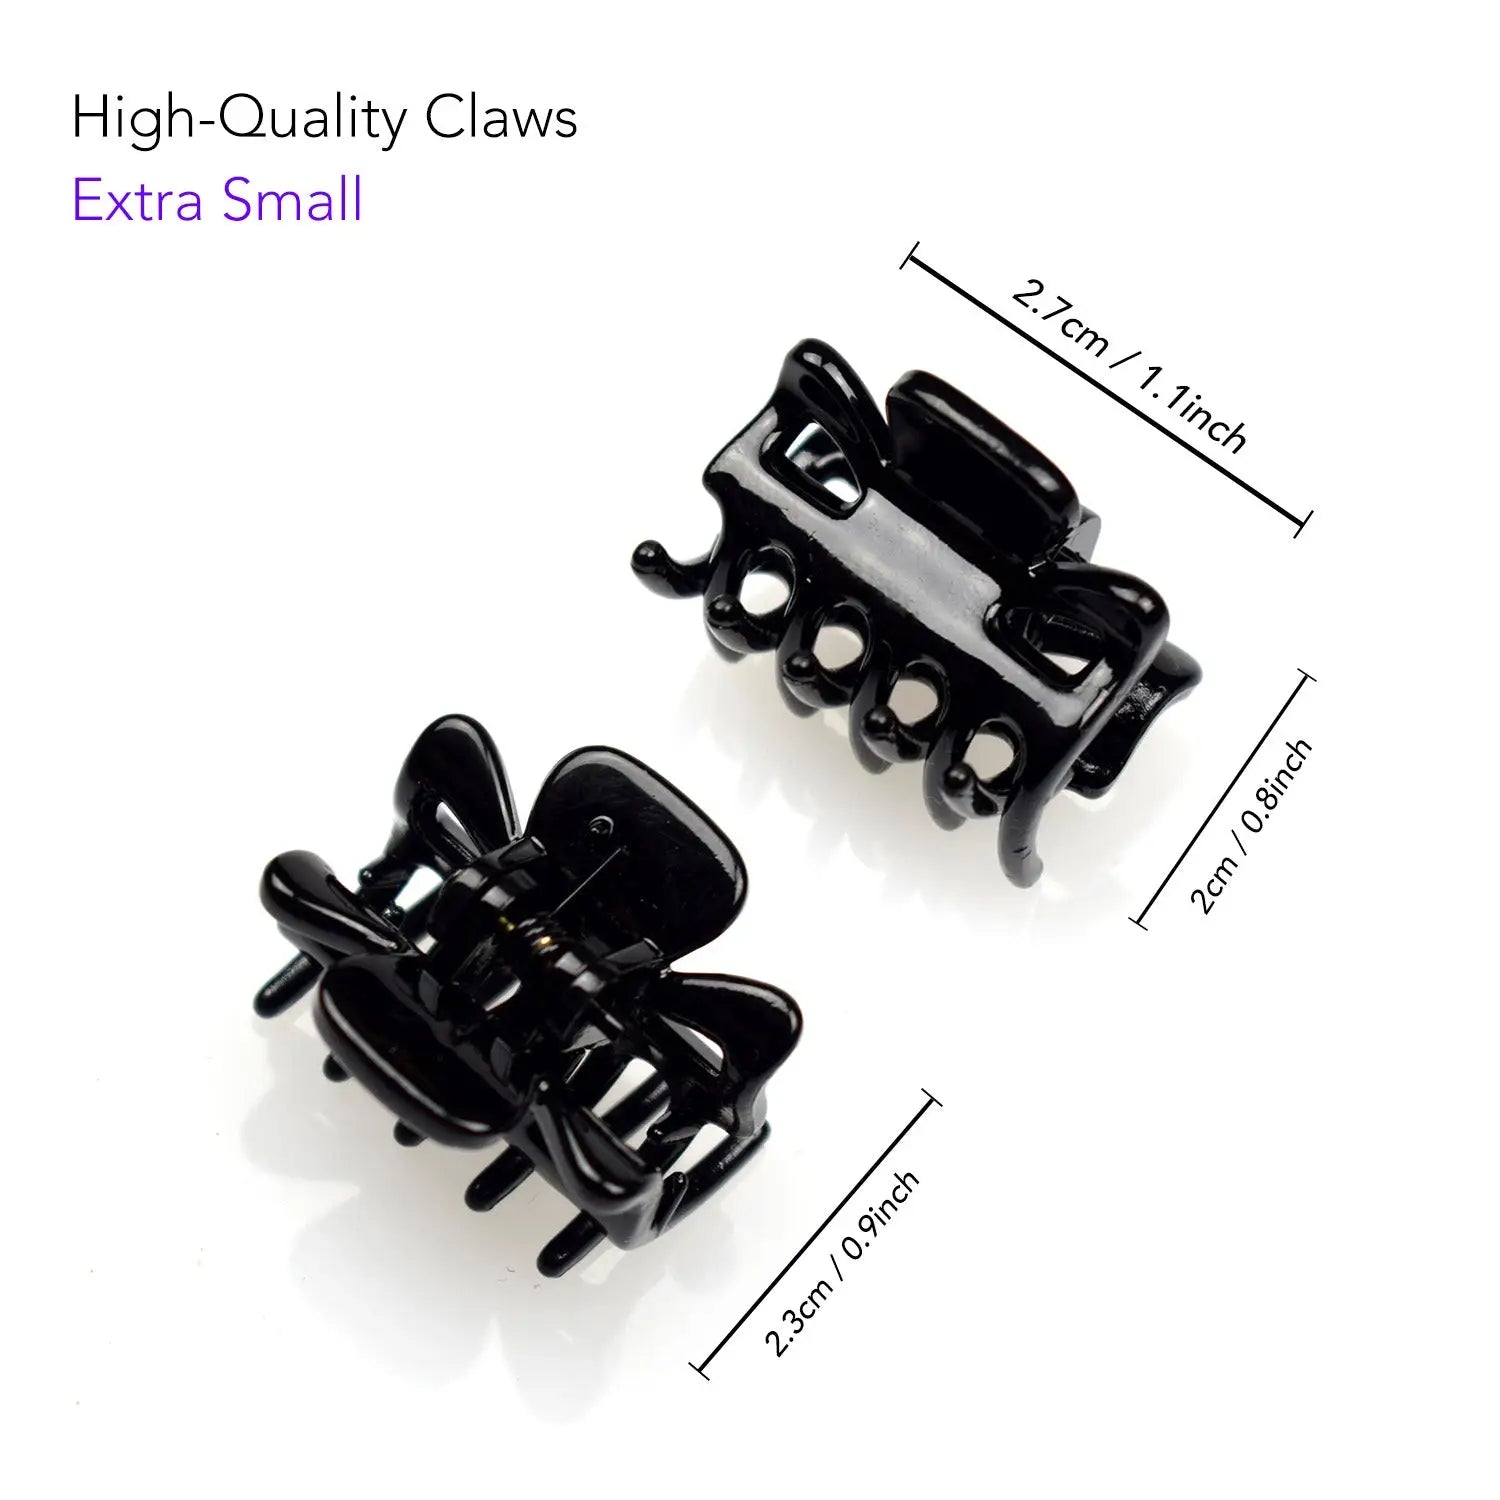 Essential Hair Claw Clips Set, 9pcs - 2.7cm: Two black clips with 2cm height